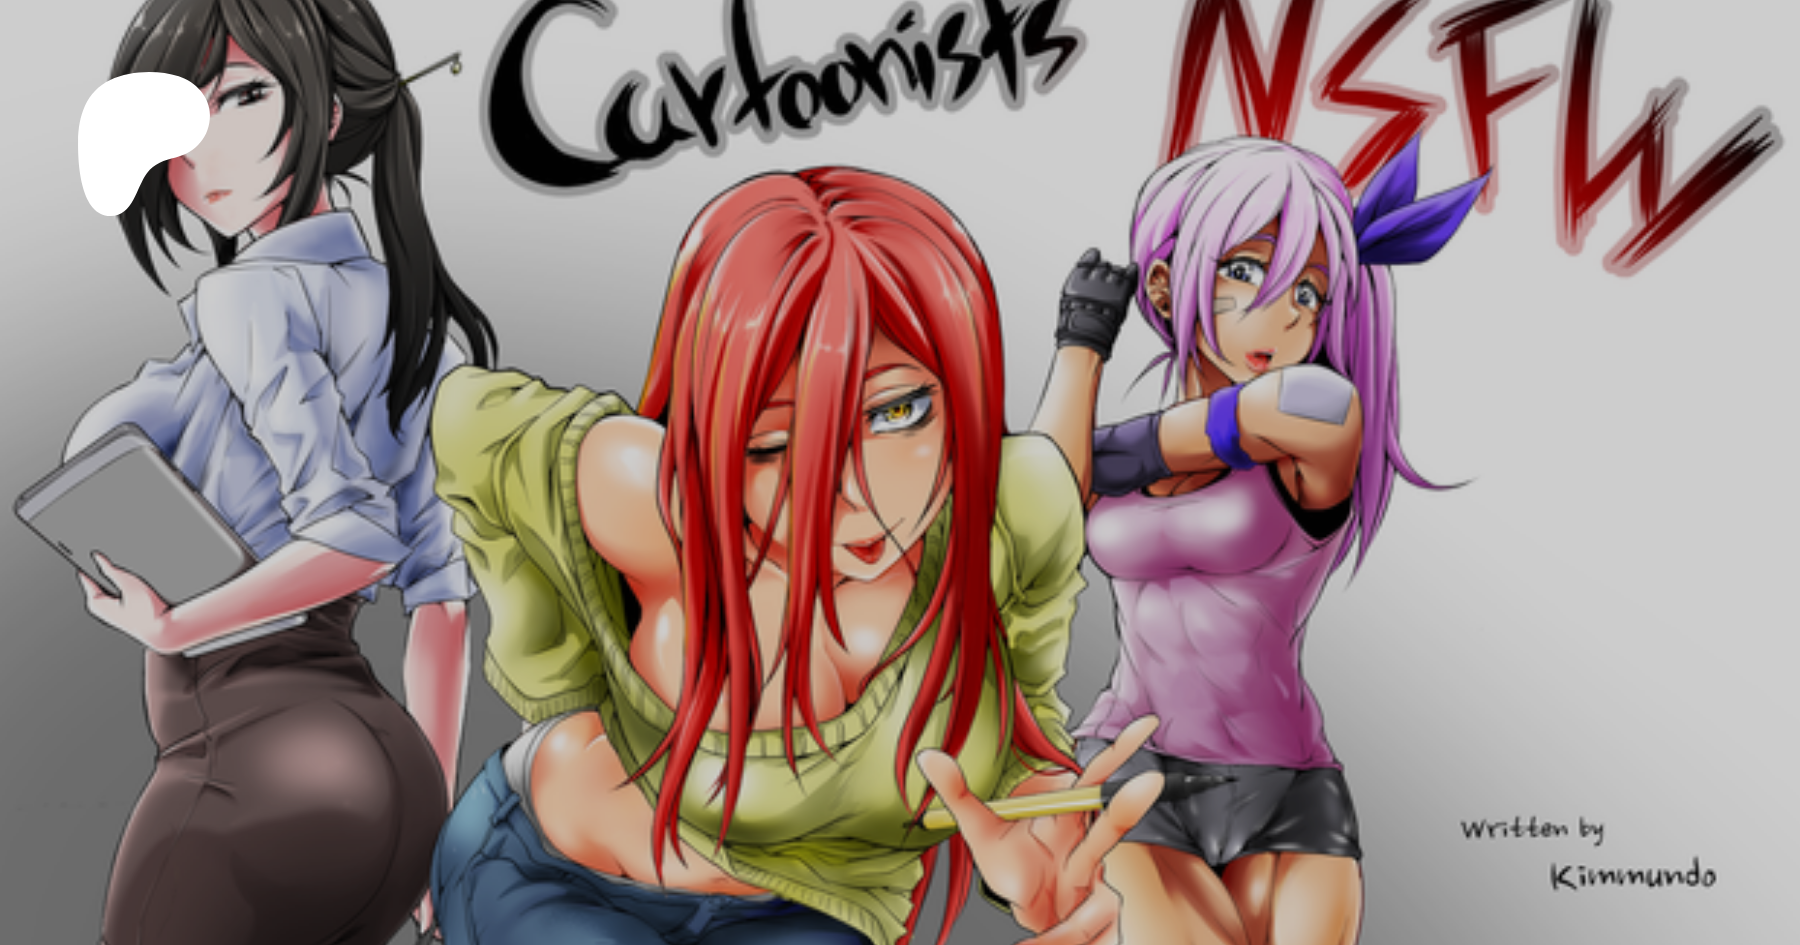 CARTOONISTS NSFW is ready to be published!! | Patreon